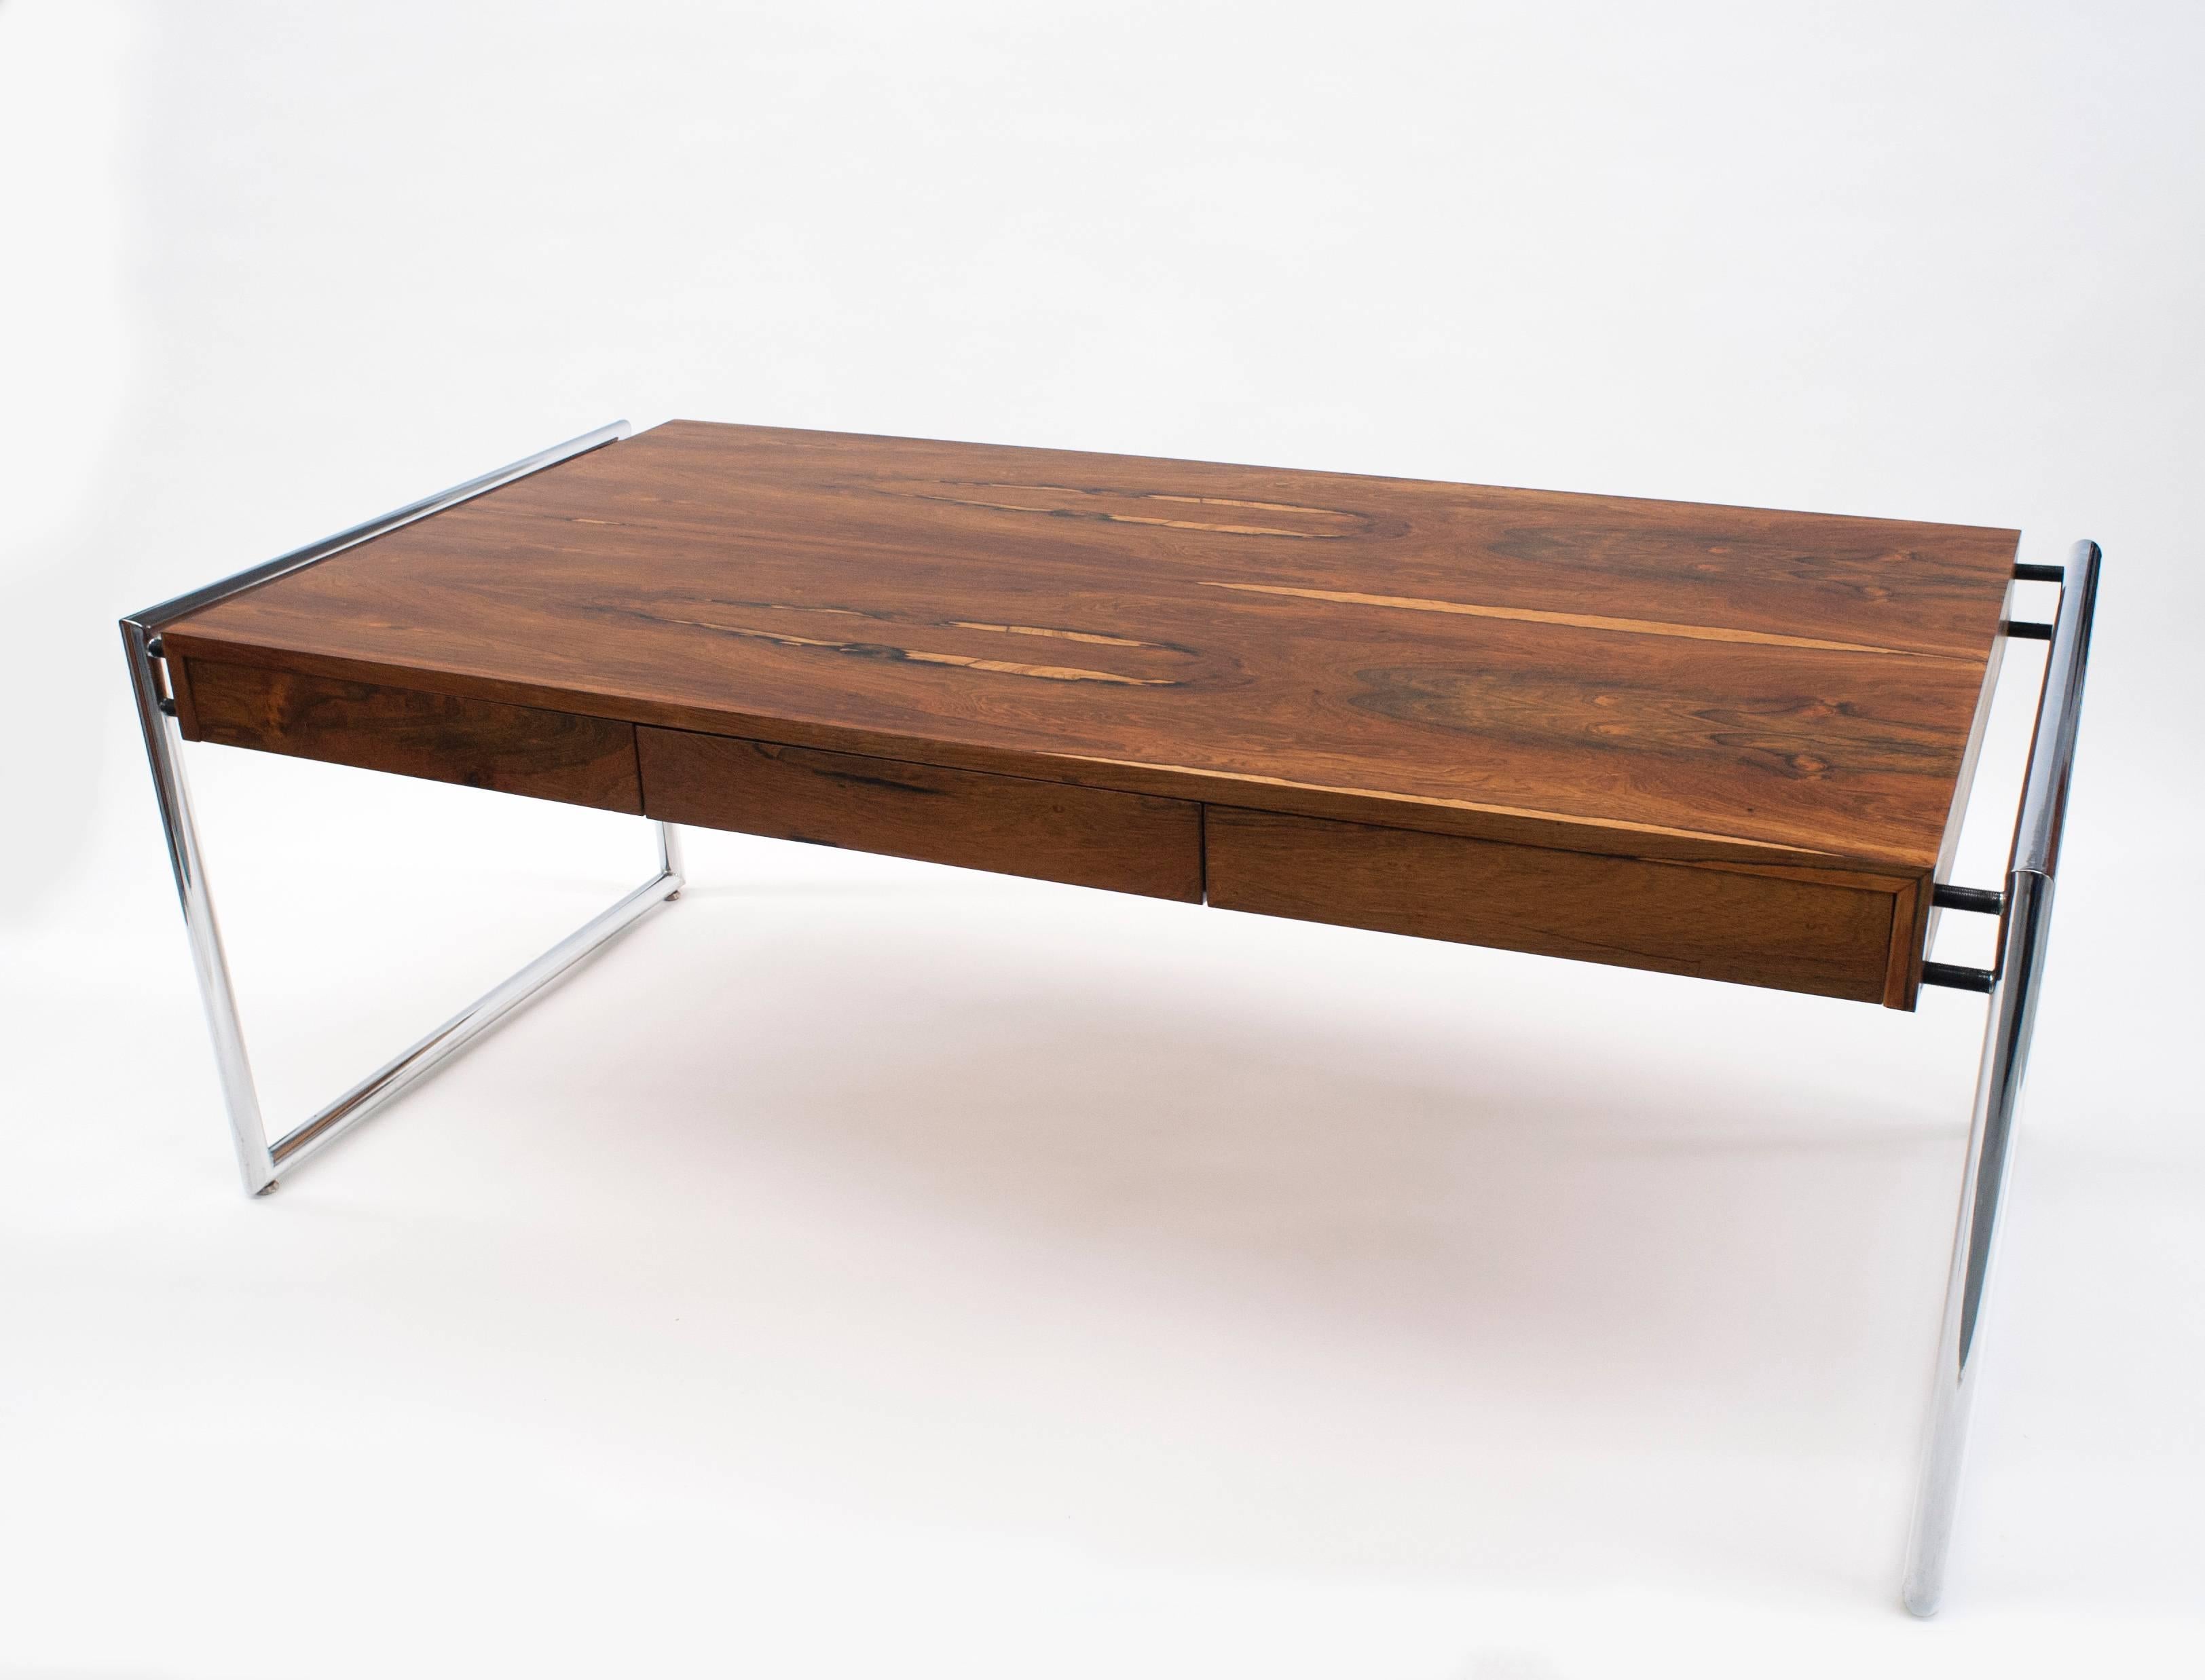 Fantastic rosewood desk attributed to Milo Baughman for Thayer Coggin. Desk is solid and well made with striking rosewood grain. Desk has three drawers and tubular chrome base. Desk has been professionally refinished and is in excellent condition. 